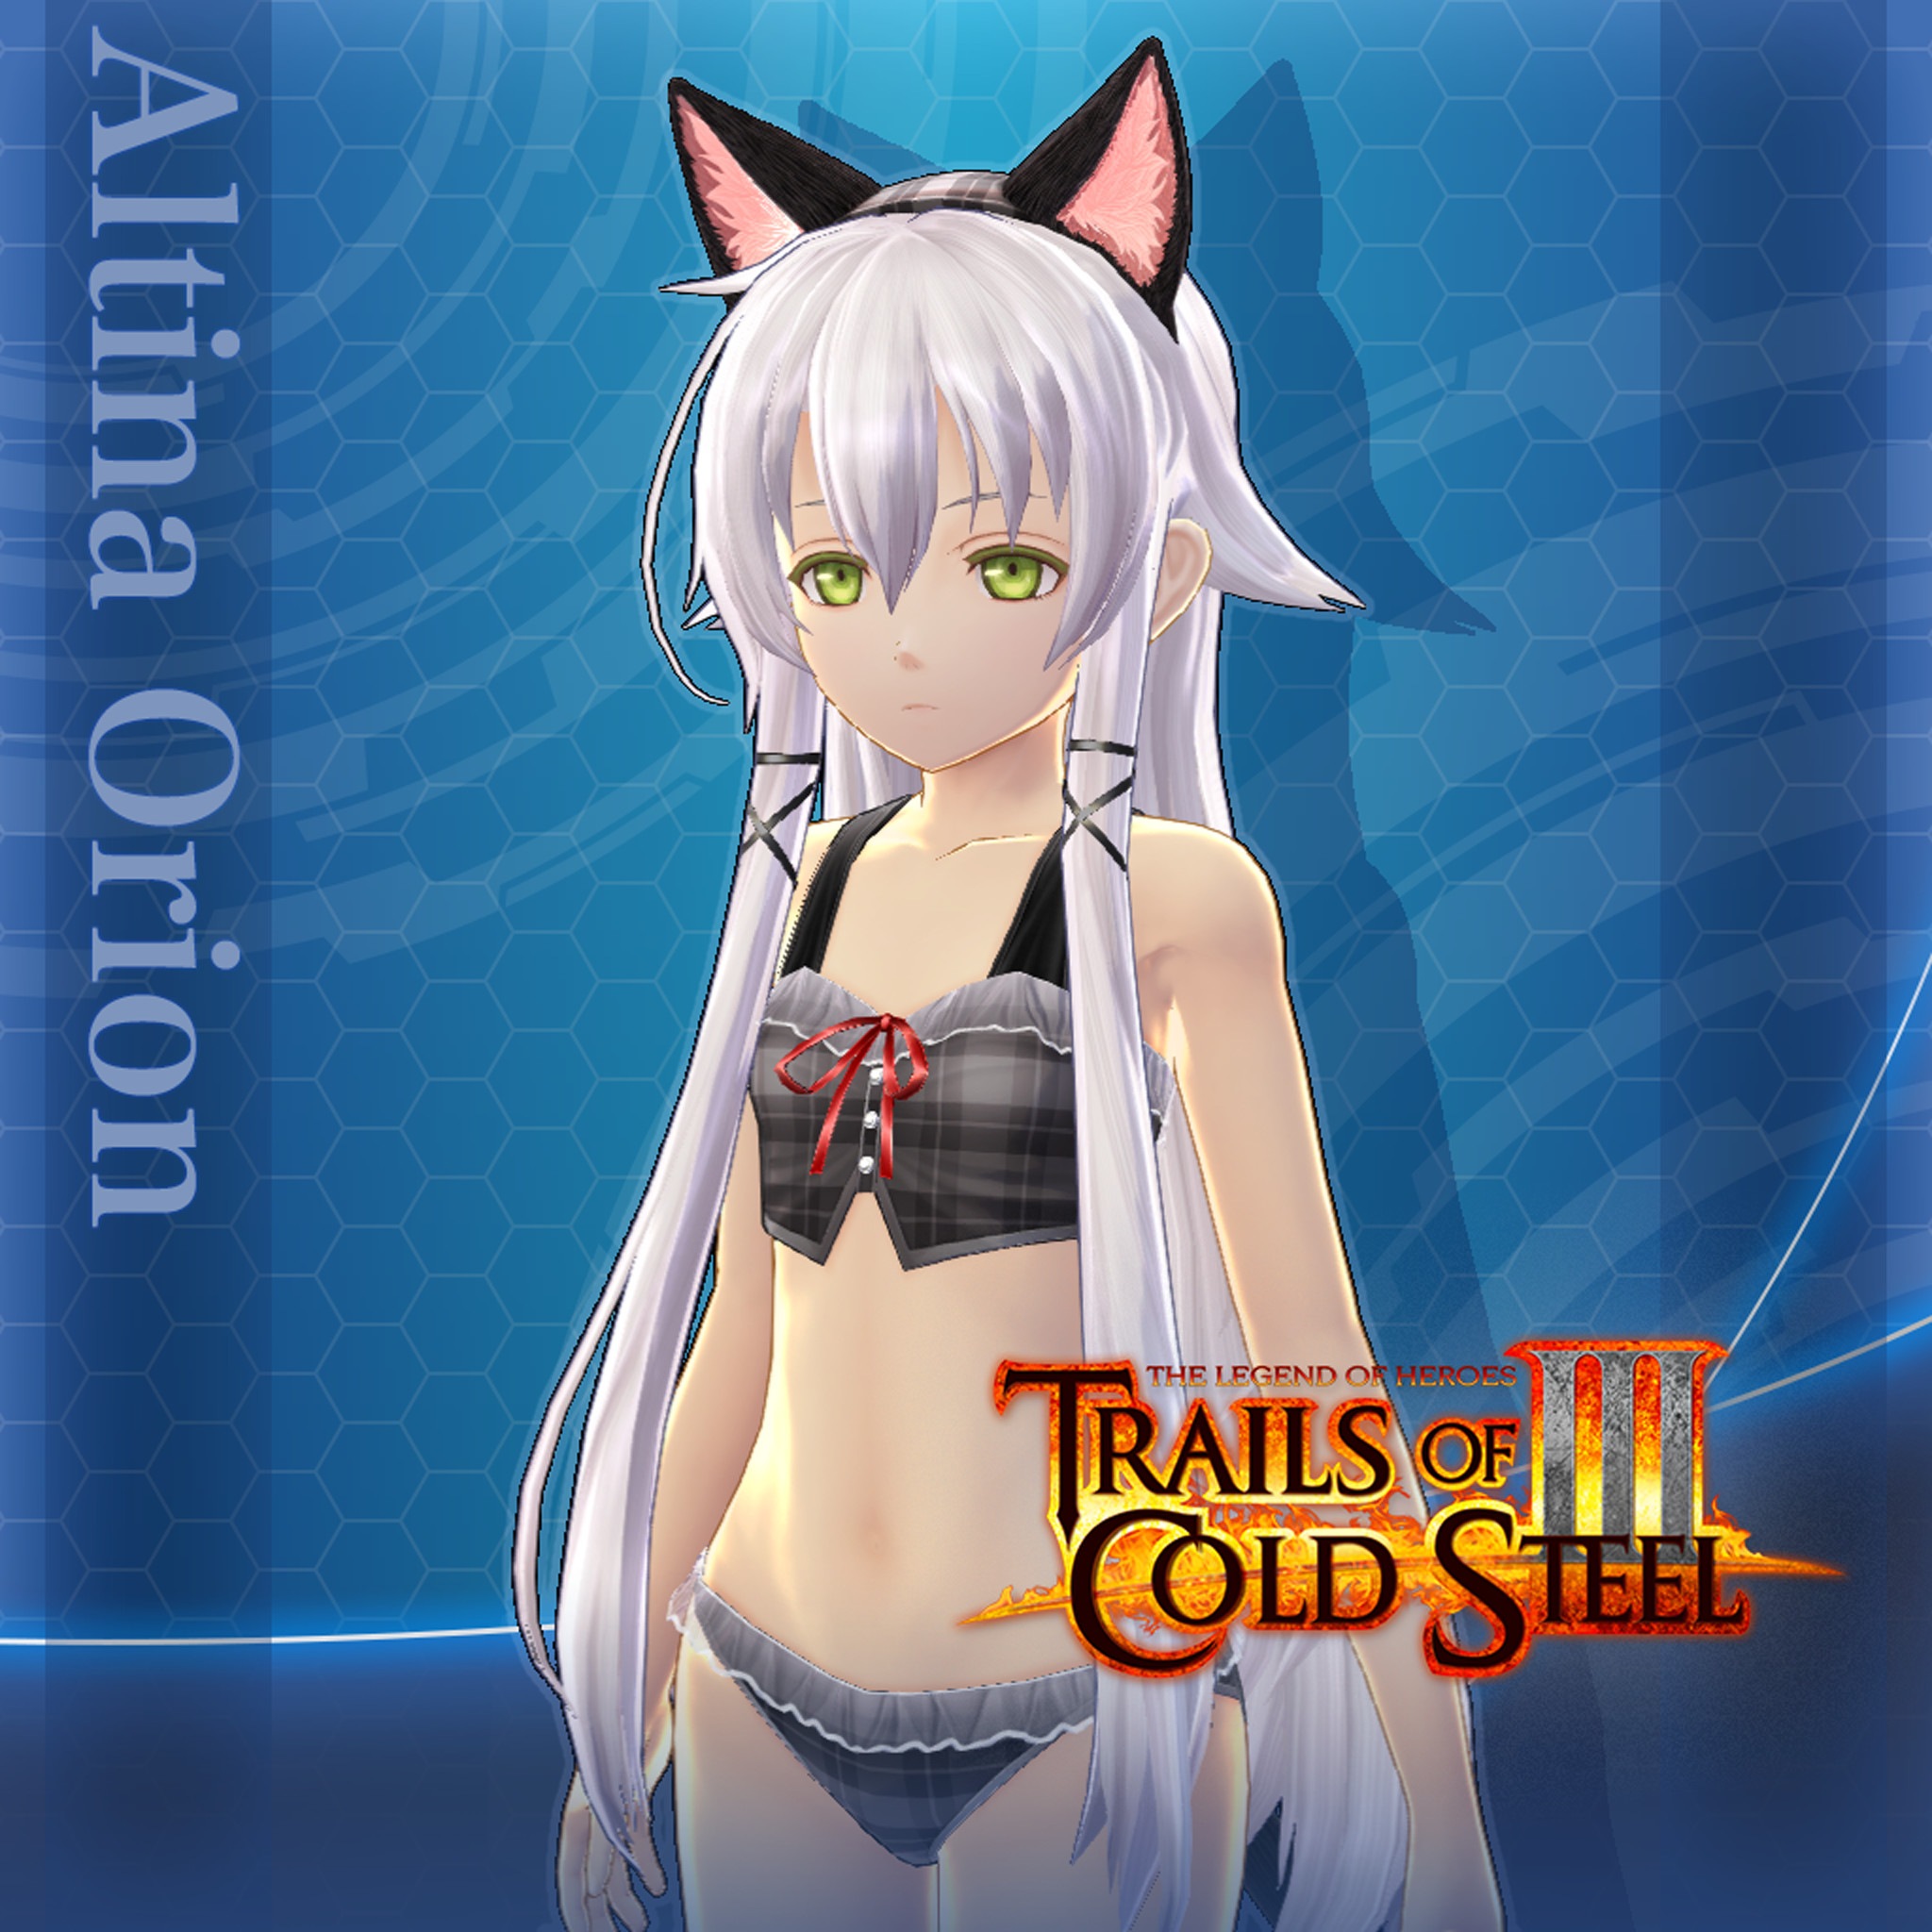 The Legend of Heroes: Trails of Cold Steel III  - Altina's "Kitty Noir" Costume screenshot